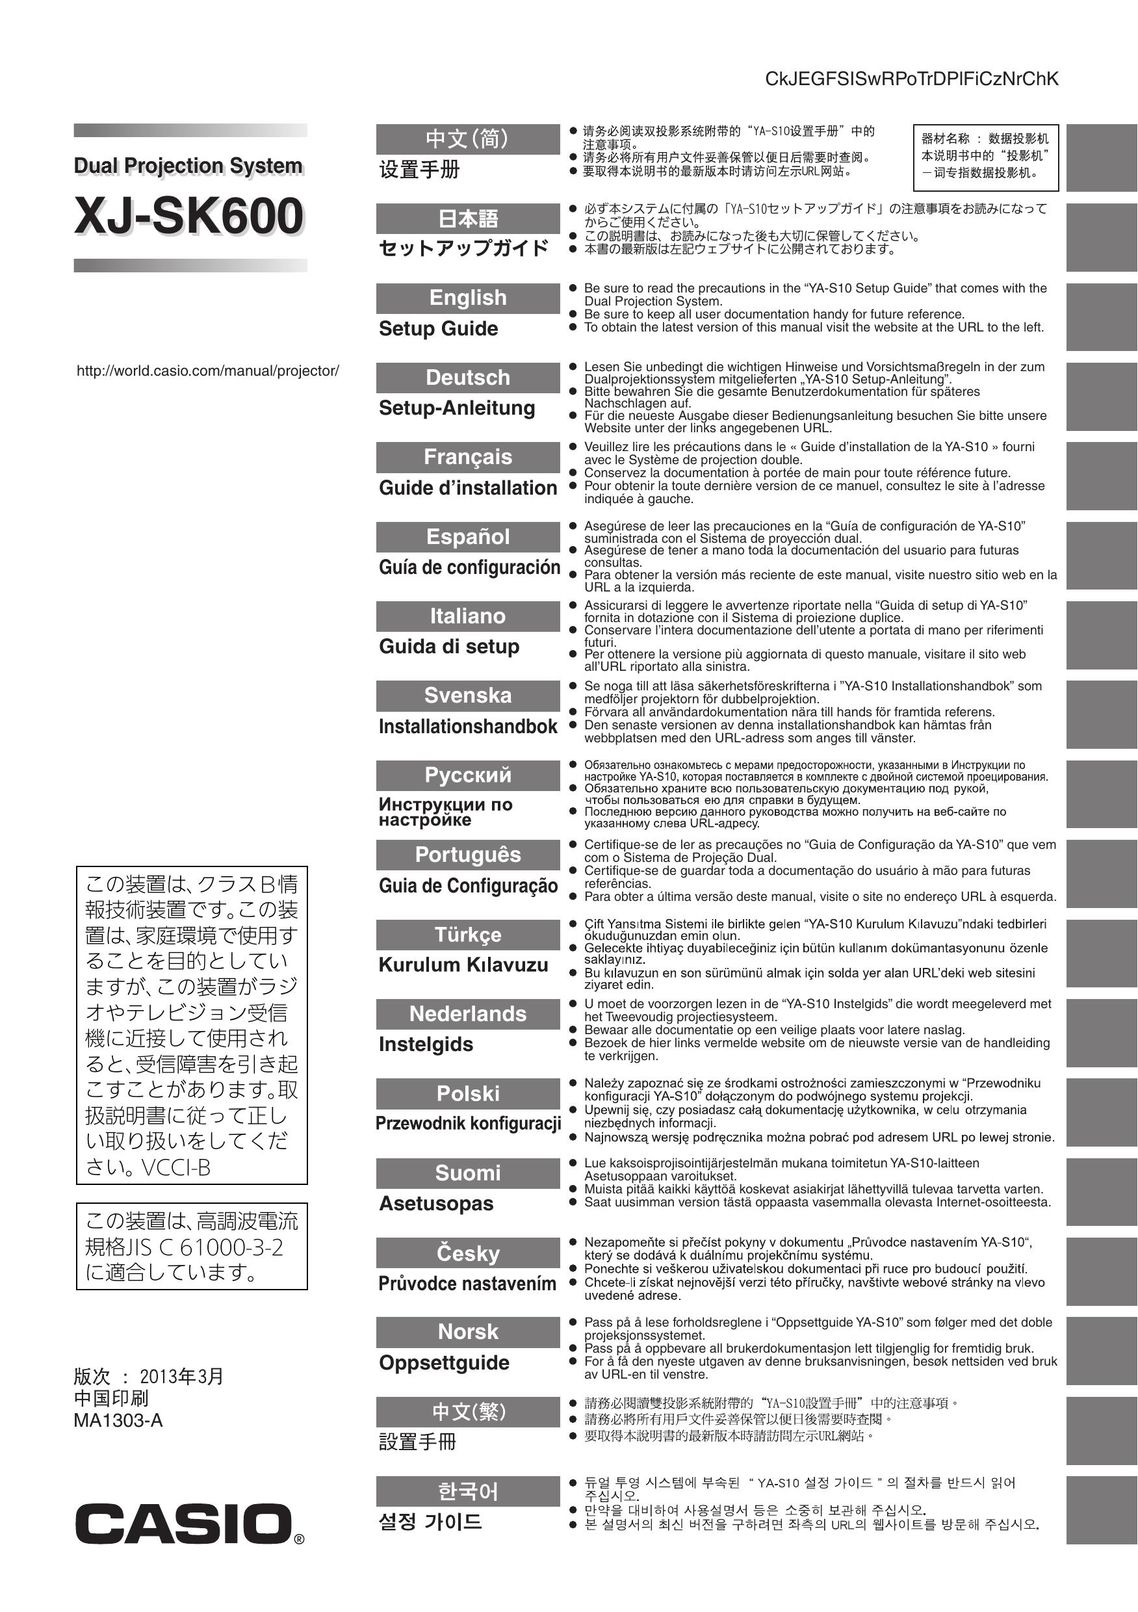 Casio XJ-SK600 Home Theater System User Manual